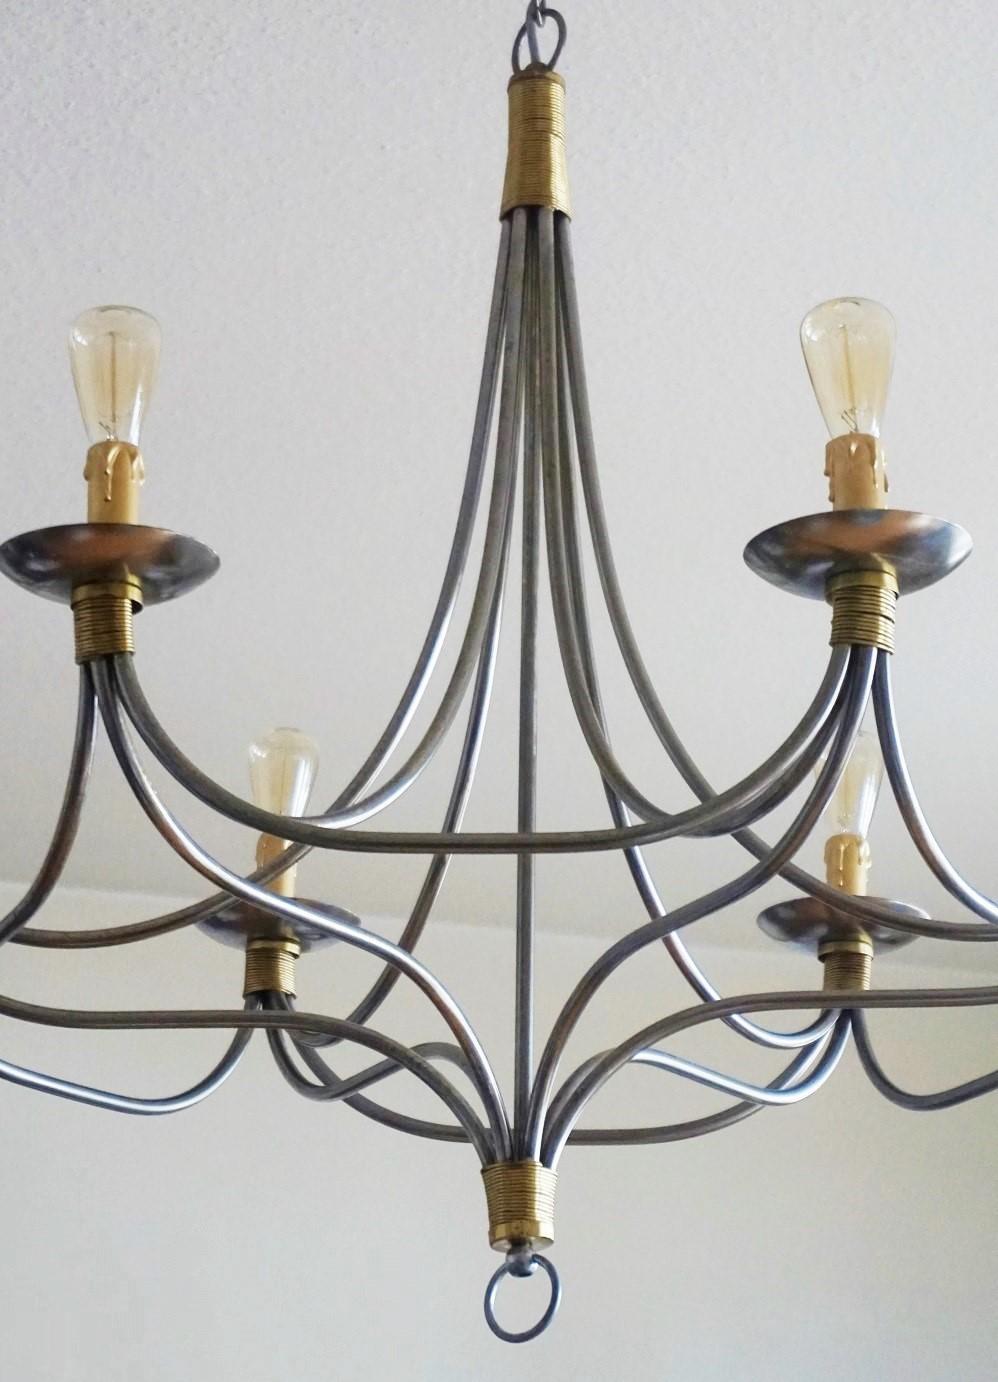 20th Century Large Midcentury Italian Brushed Chrome and Brass Six-Light Chandelier For Sale